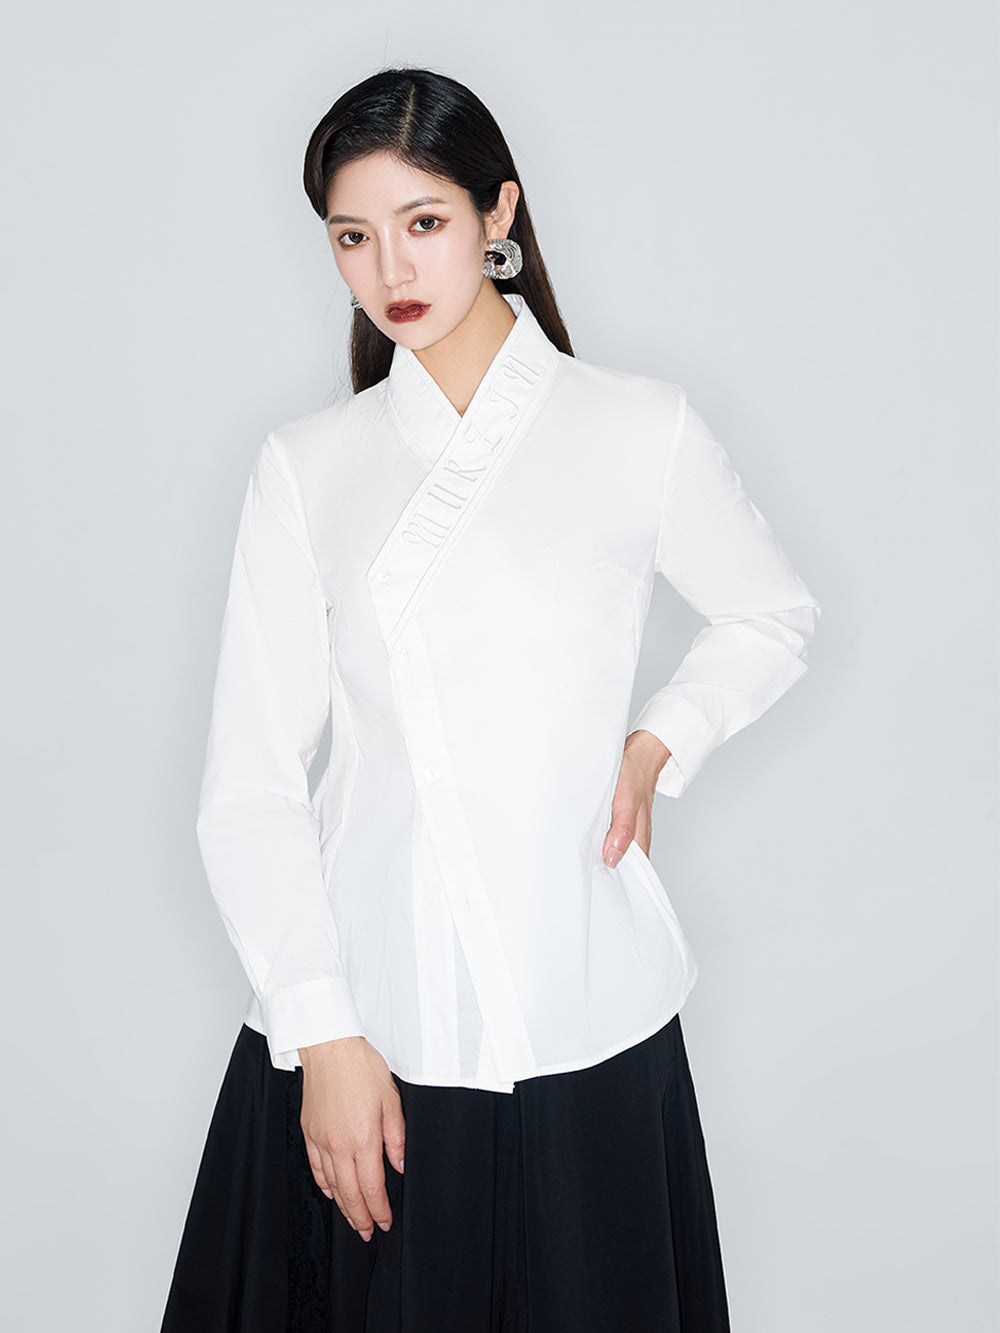 MUKZIN Linglong Series "White Orchid" New Chinese Letter Embroidery Slim Fit Cross-Breasted Hanfu Shirt